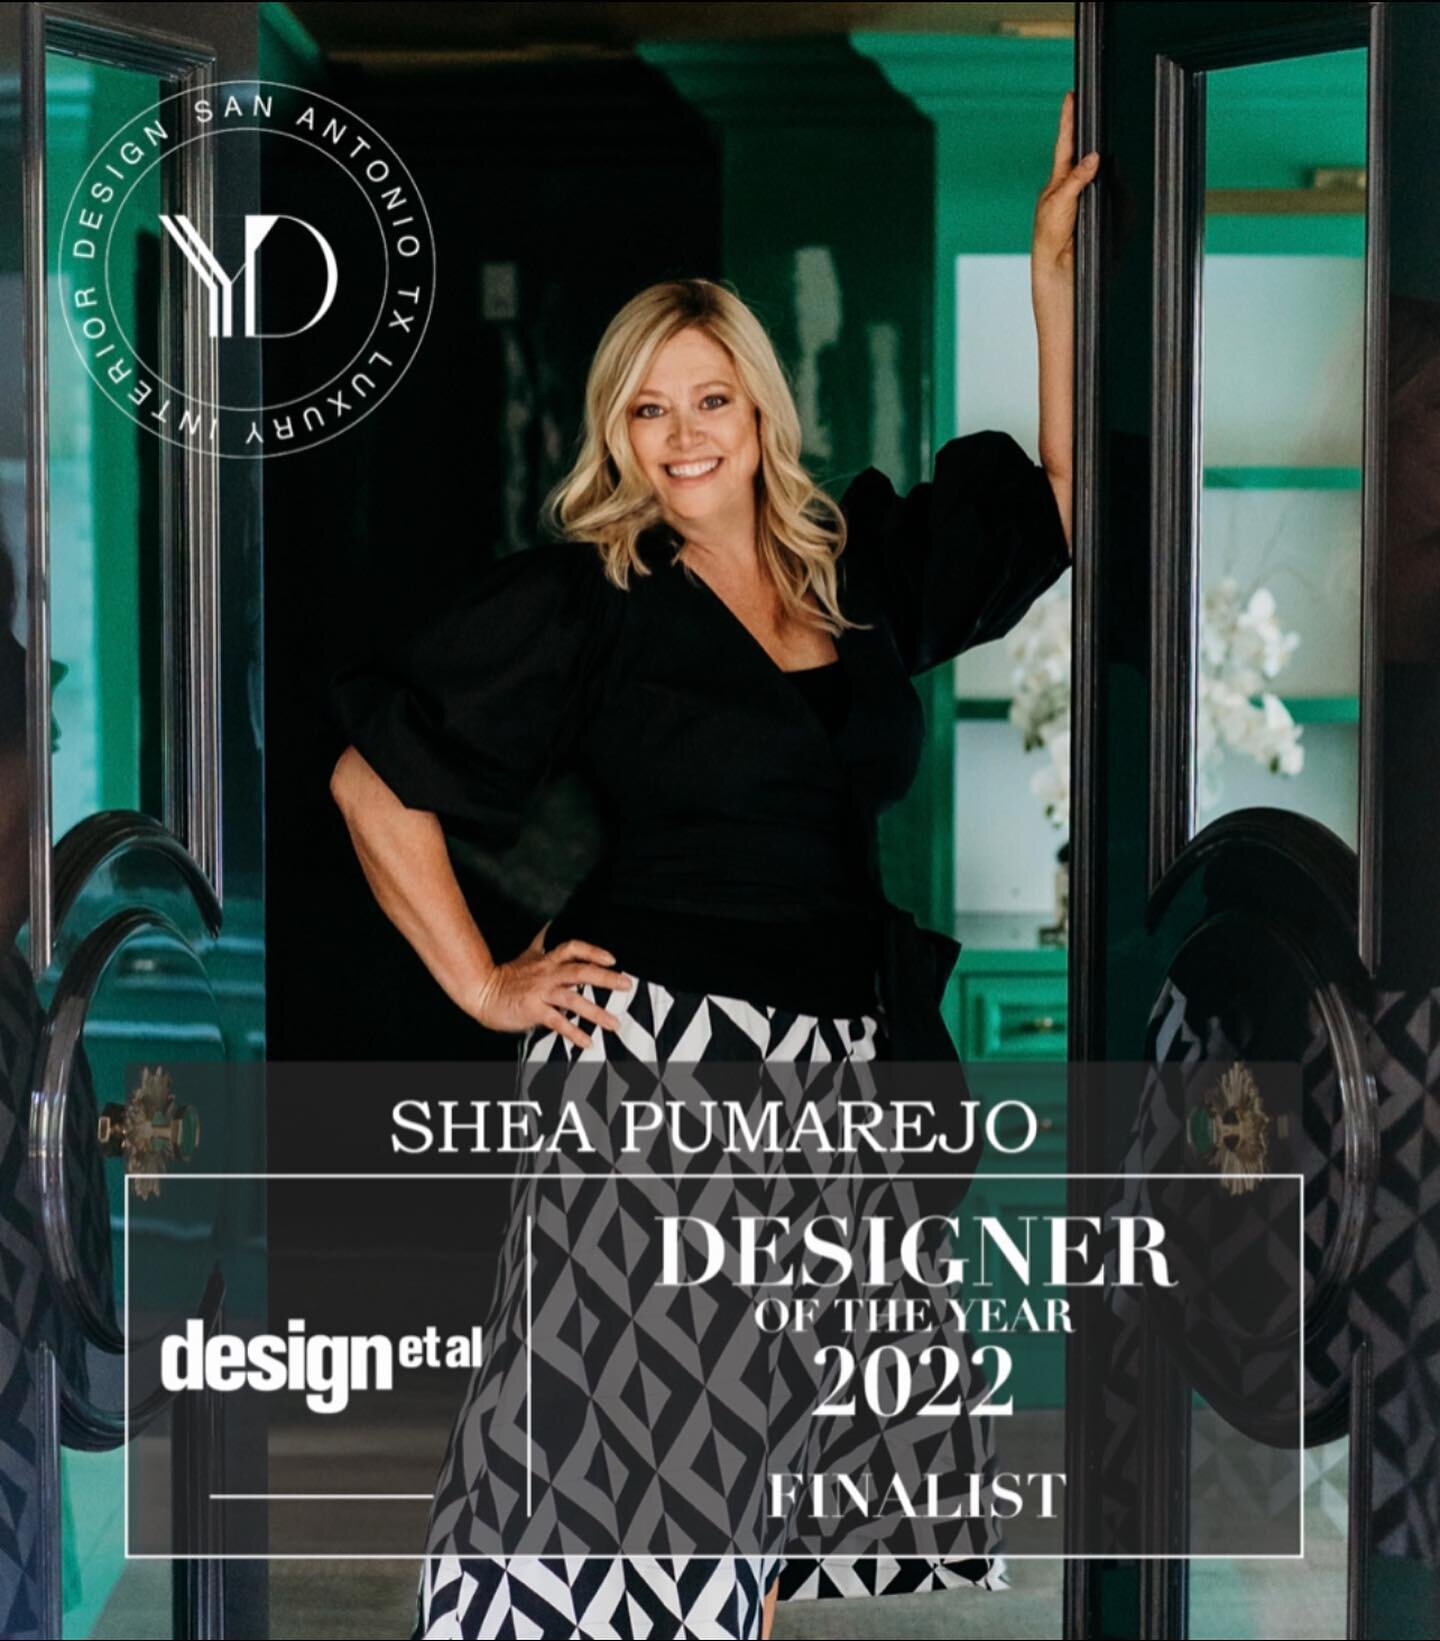 What an honor it is to be considered for this award among the best of the international design community. It just doesn&rsquo;t get any better than this!
#internationaldesignandarchitectureawards #designeroftheyear2022finalist #london🇬🇧 #luxurydesi